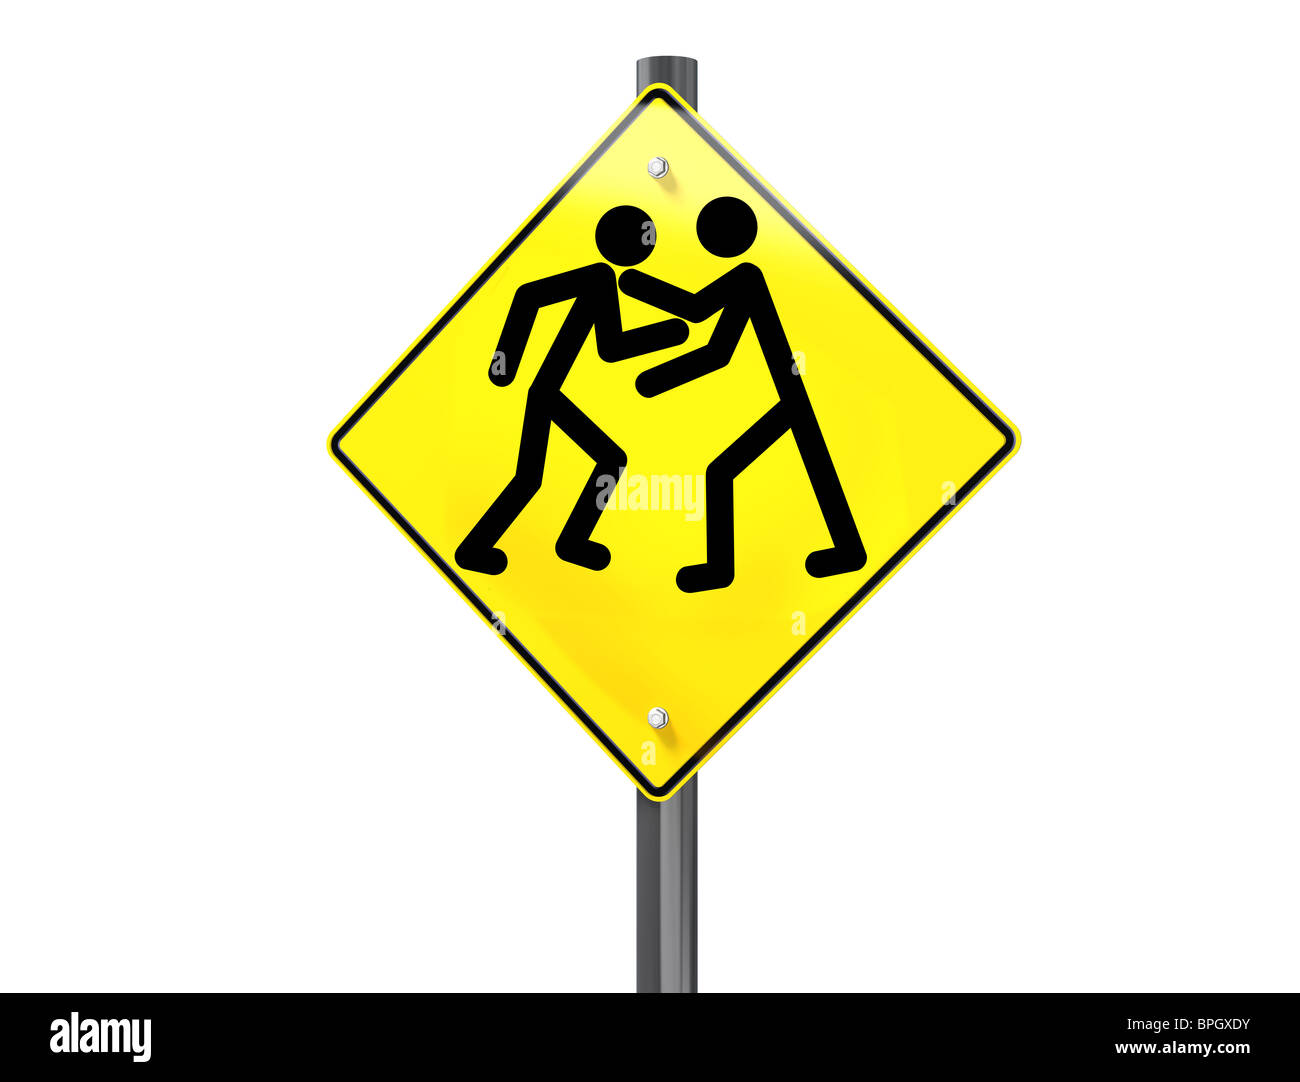 Illustration of a road traffic sign signaling road rage Stock Photo